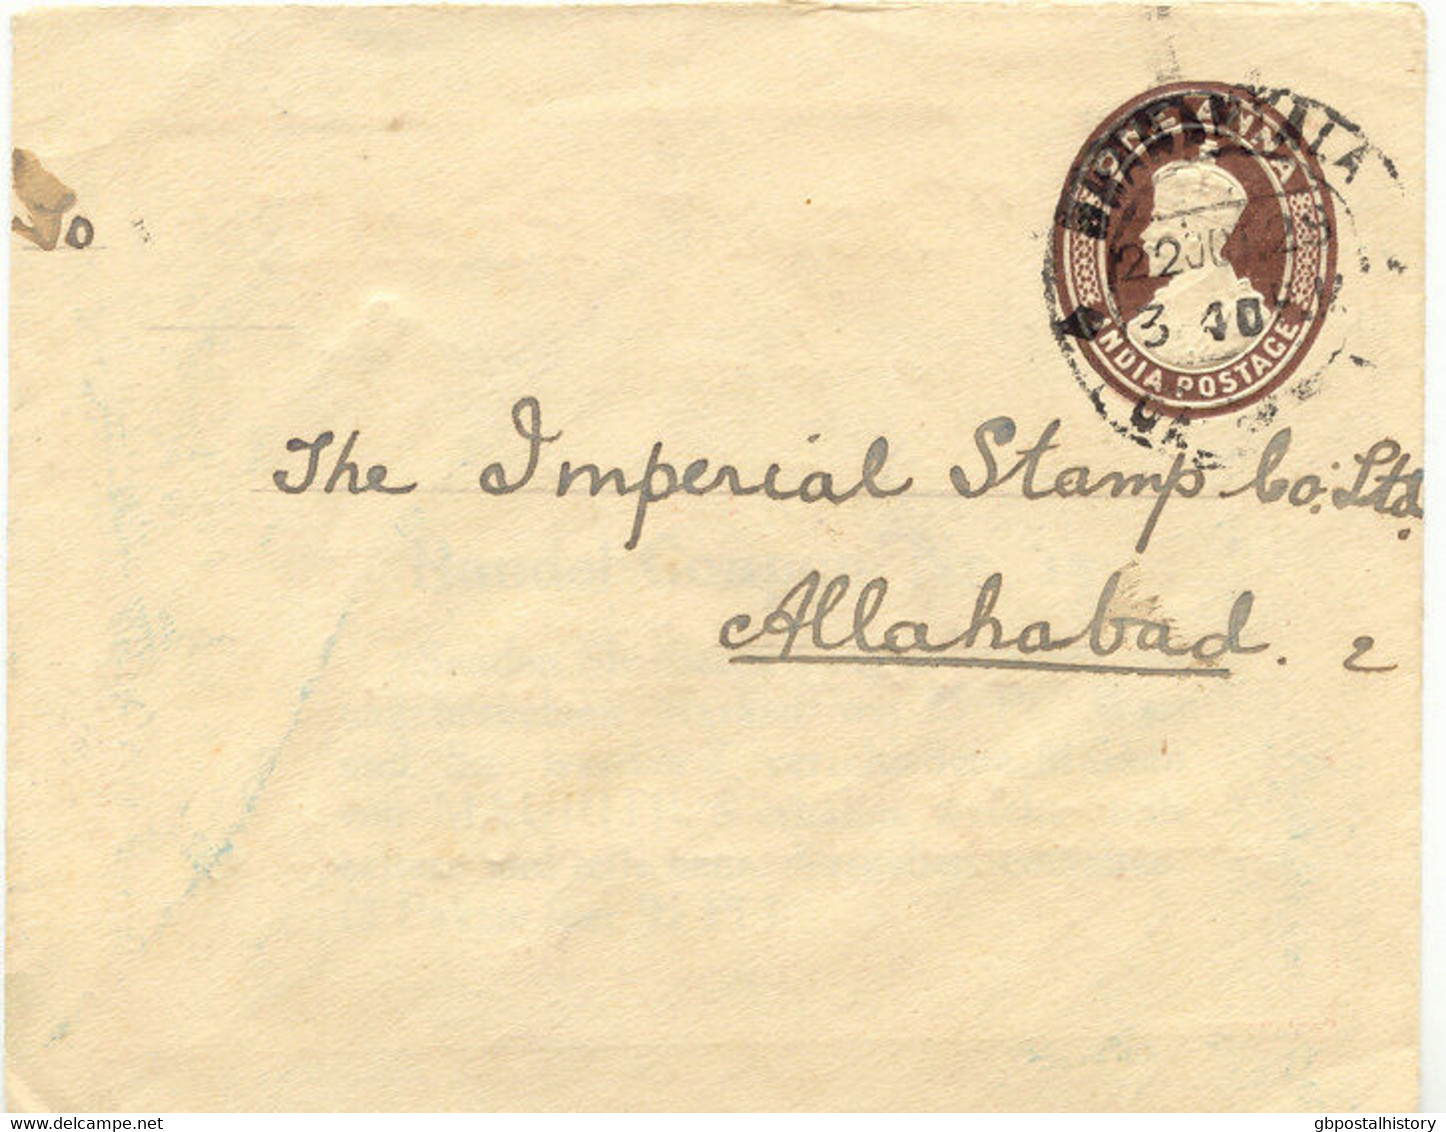 INDIA 1929 GV One Anna Stamped To Order Postal Stationery Envelope (ADVERTISING: Imperial Stamp Co. Ltd, Allahabad) - 1911-35 Koning George V